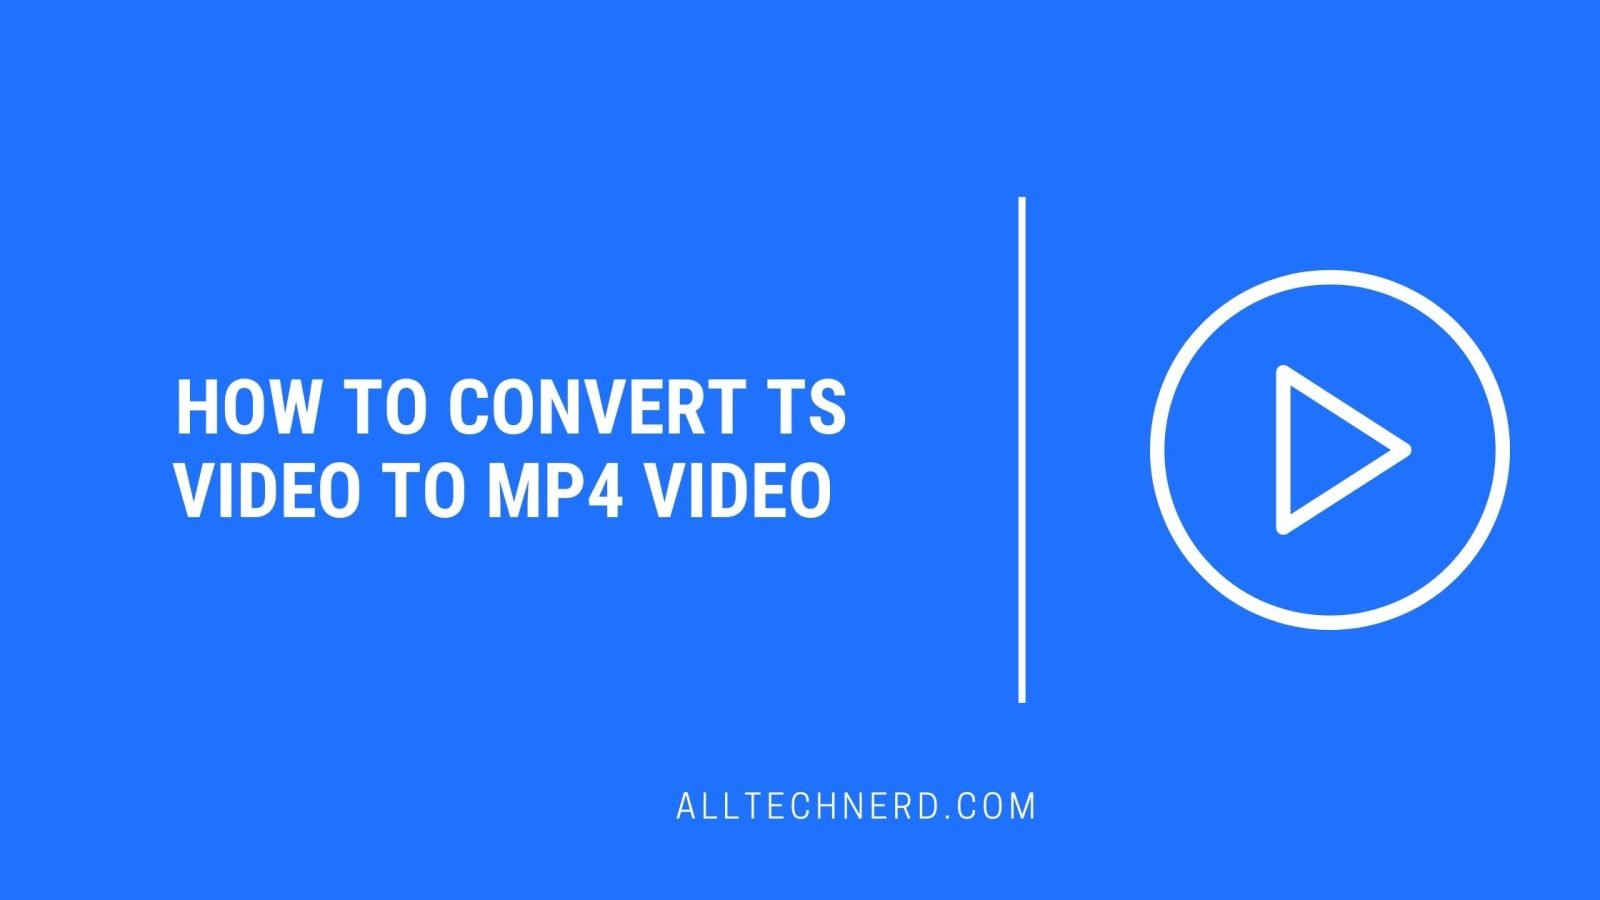 How to Convert TS Video to MP4 Video